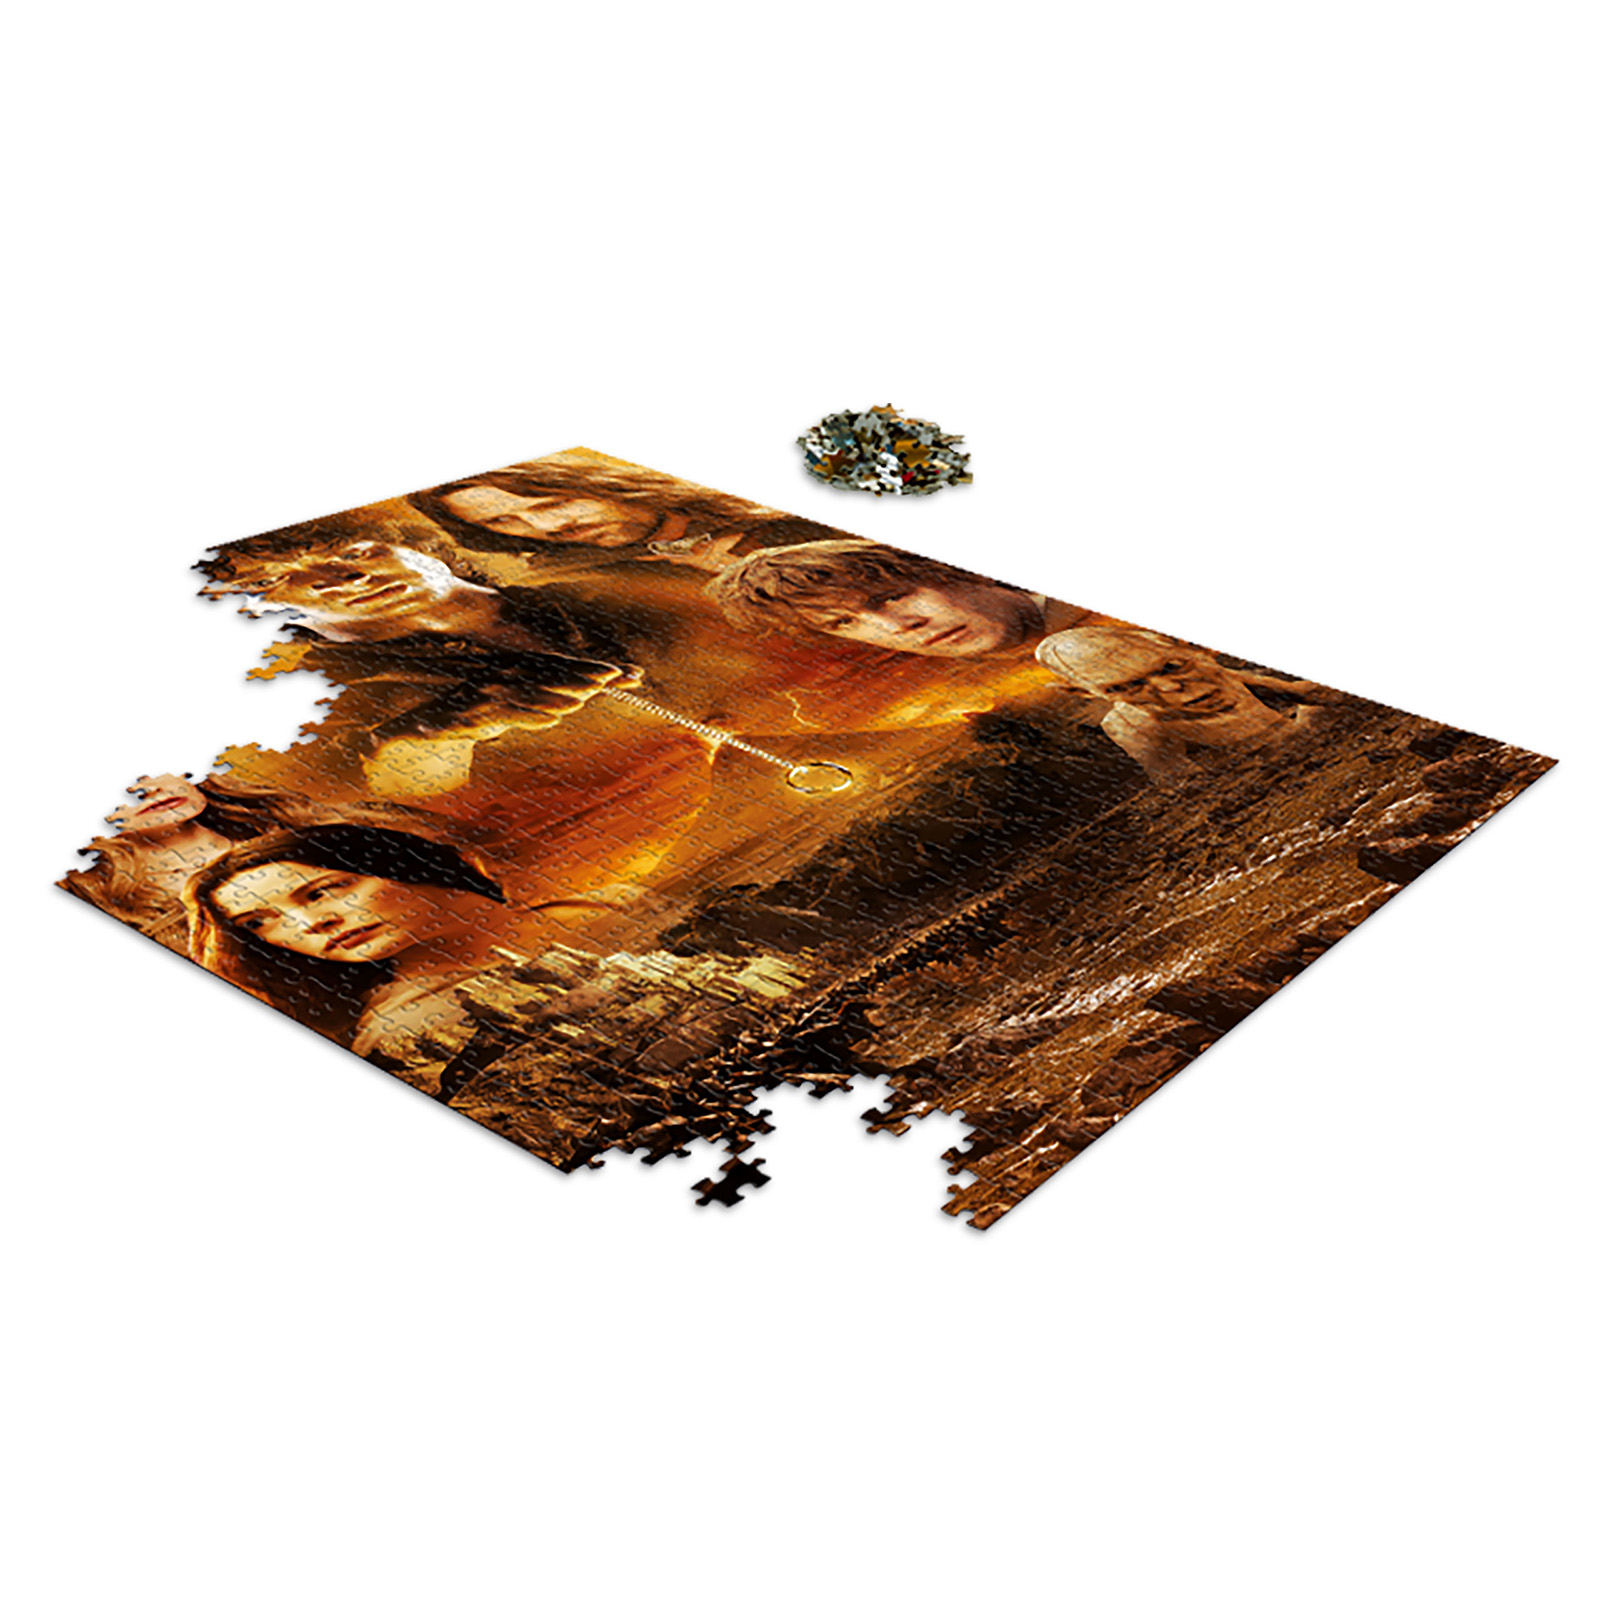 Lord of the Rings - Mount Doom Puzzle